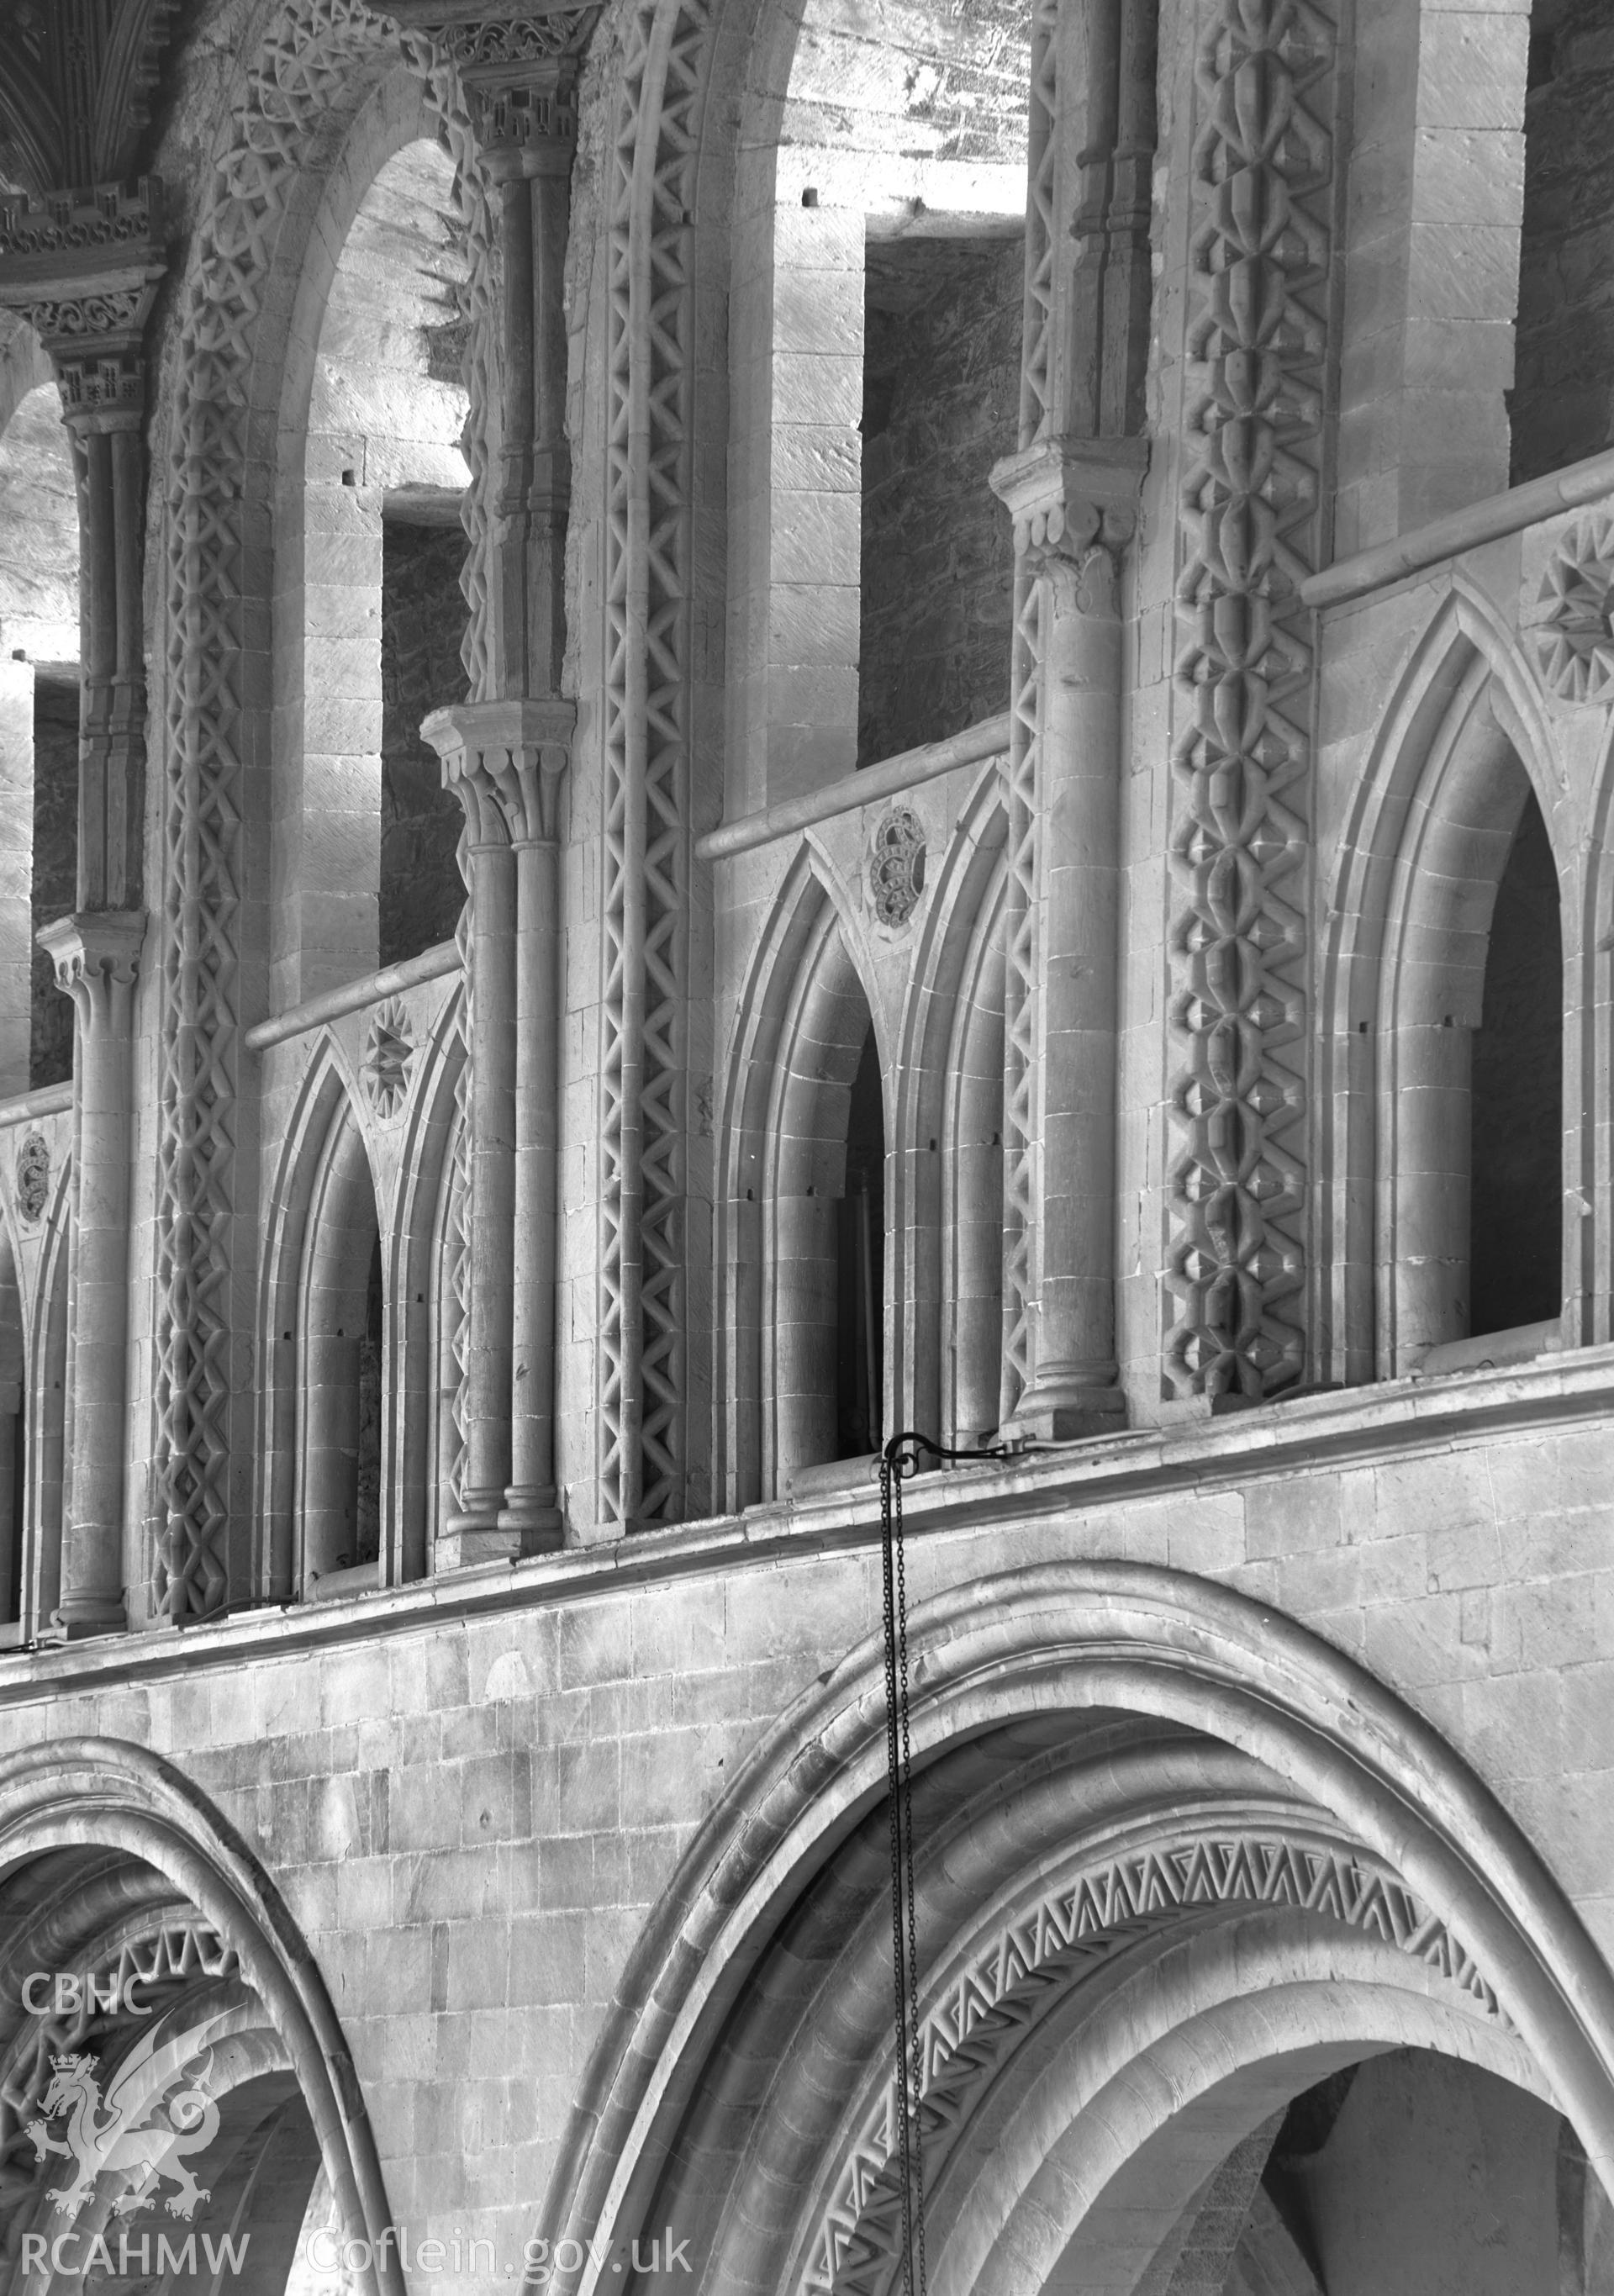 Digital copy of a black and white acetate negative showing interior view of St. David's Cathedral, taken by E.W. Lovegrove, July 1936